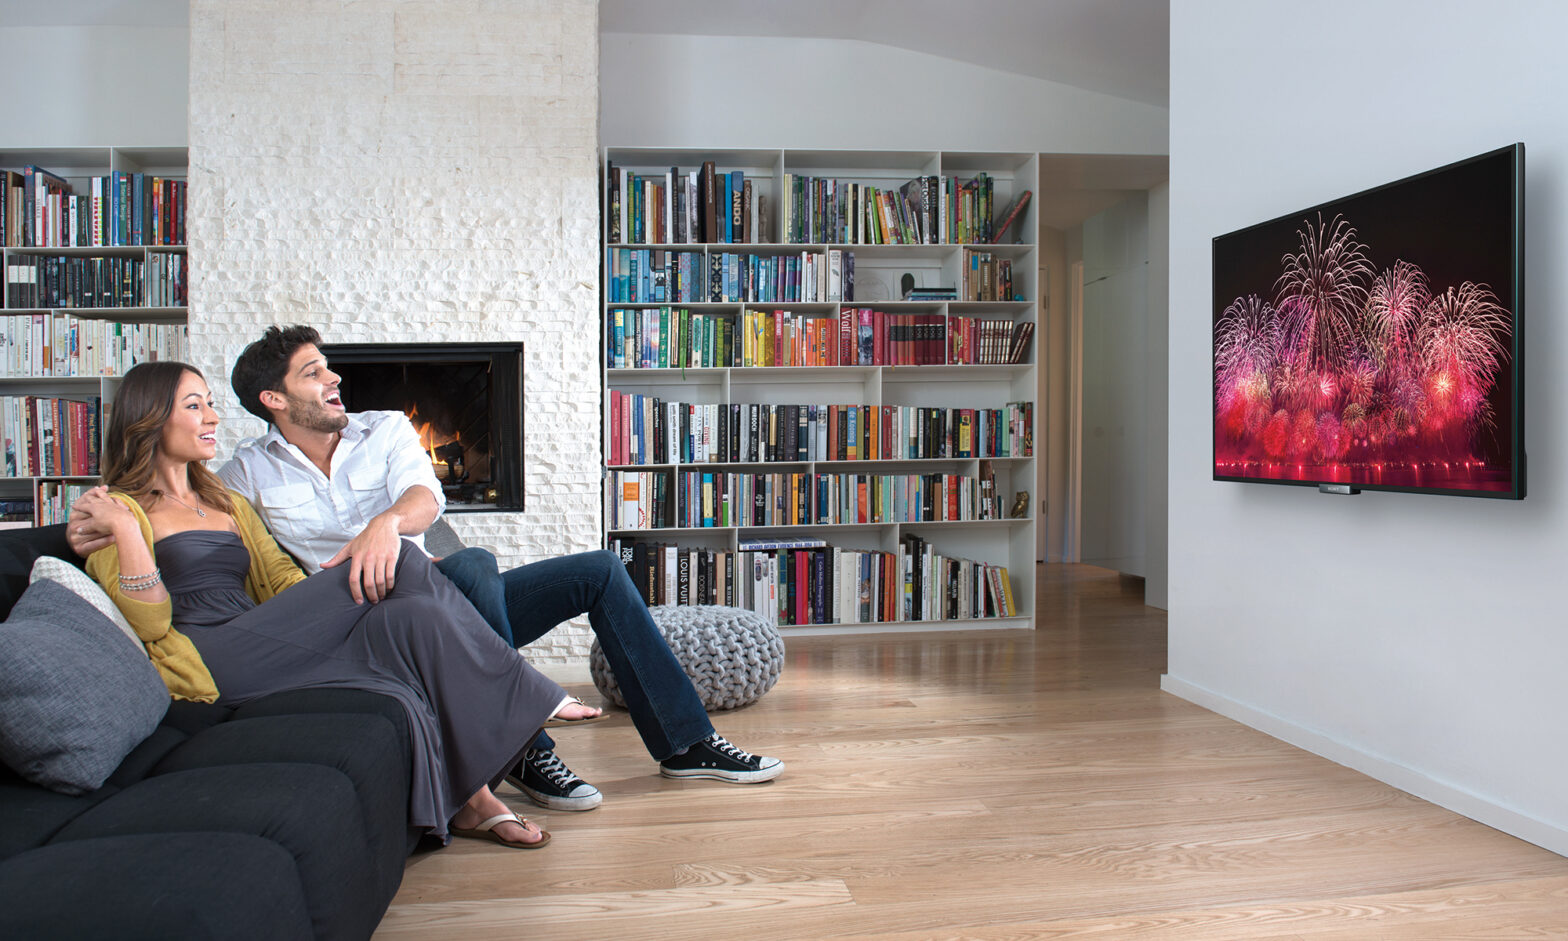 Size, sound & set-up matter when choosing the right TV!